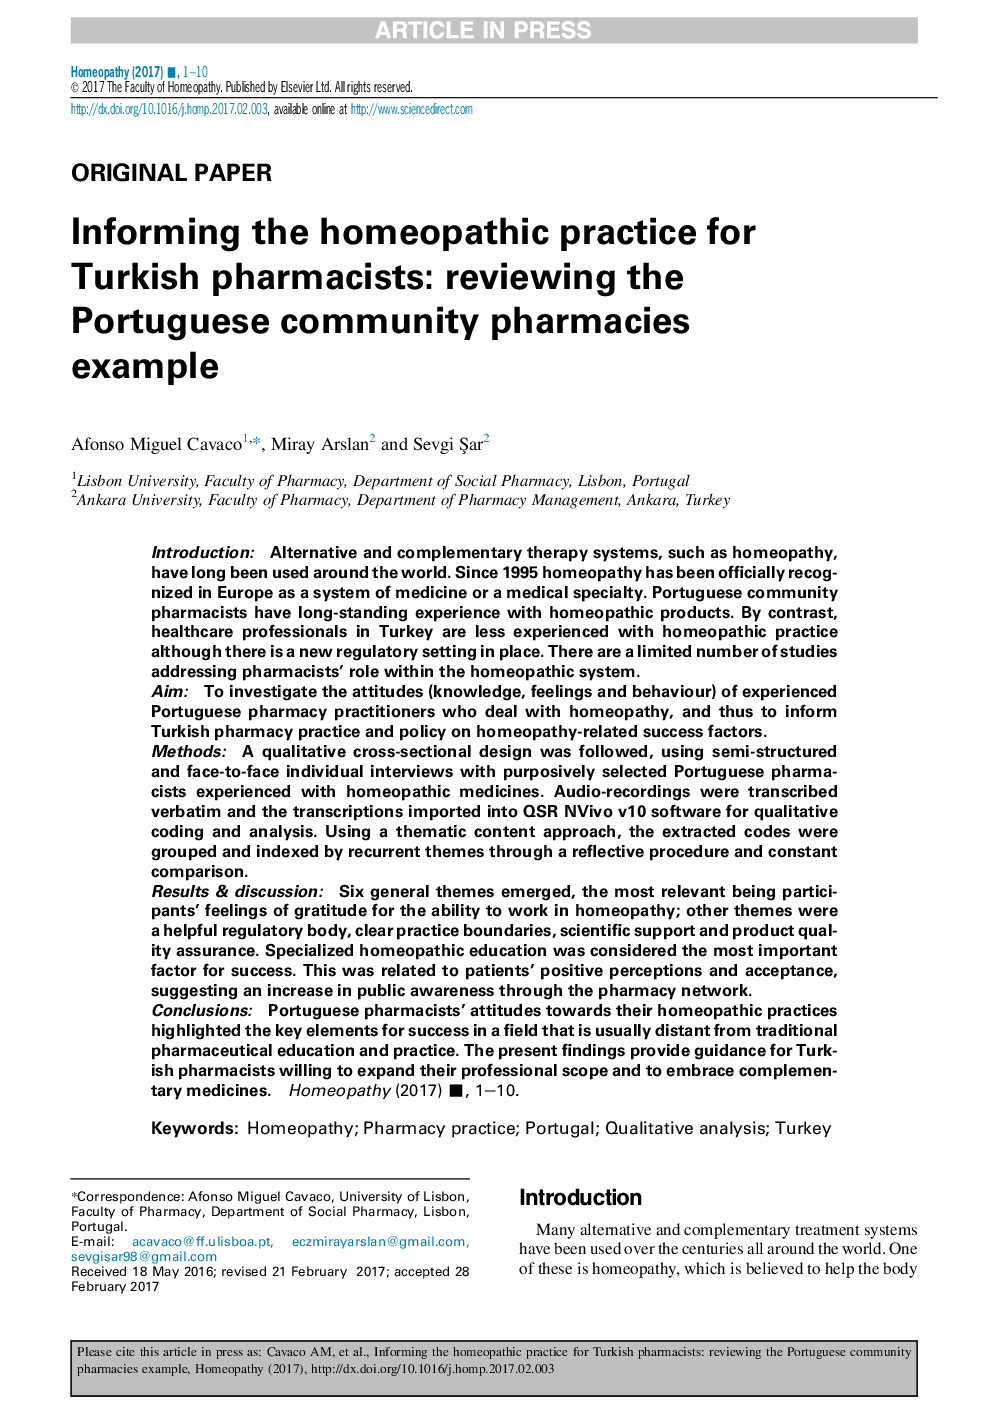 Informing the homeopathic practice for Turkish pharmacists: reviewing the example of Portuguese community pharmacies